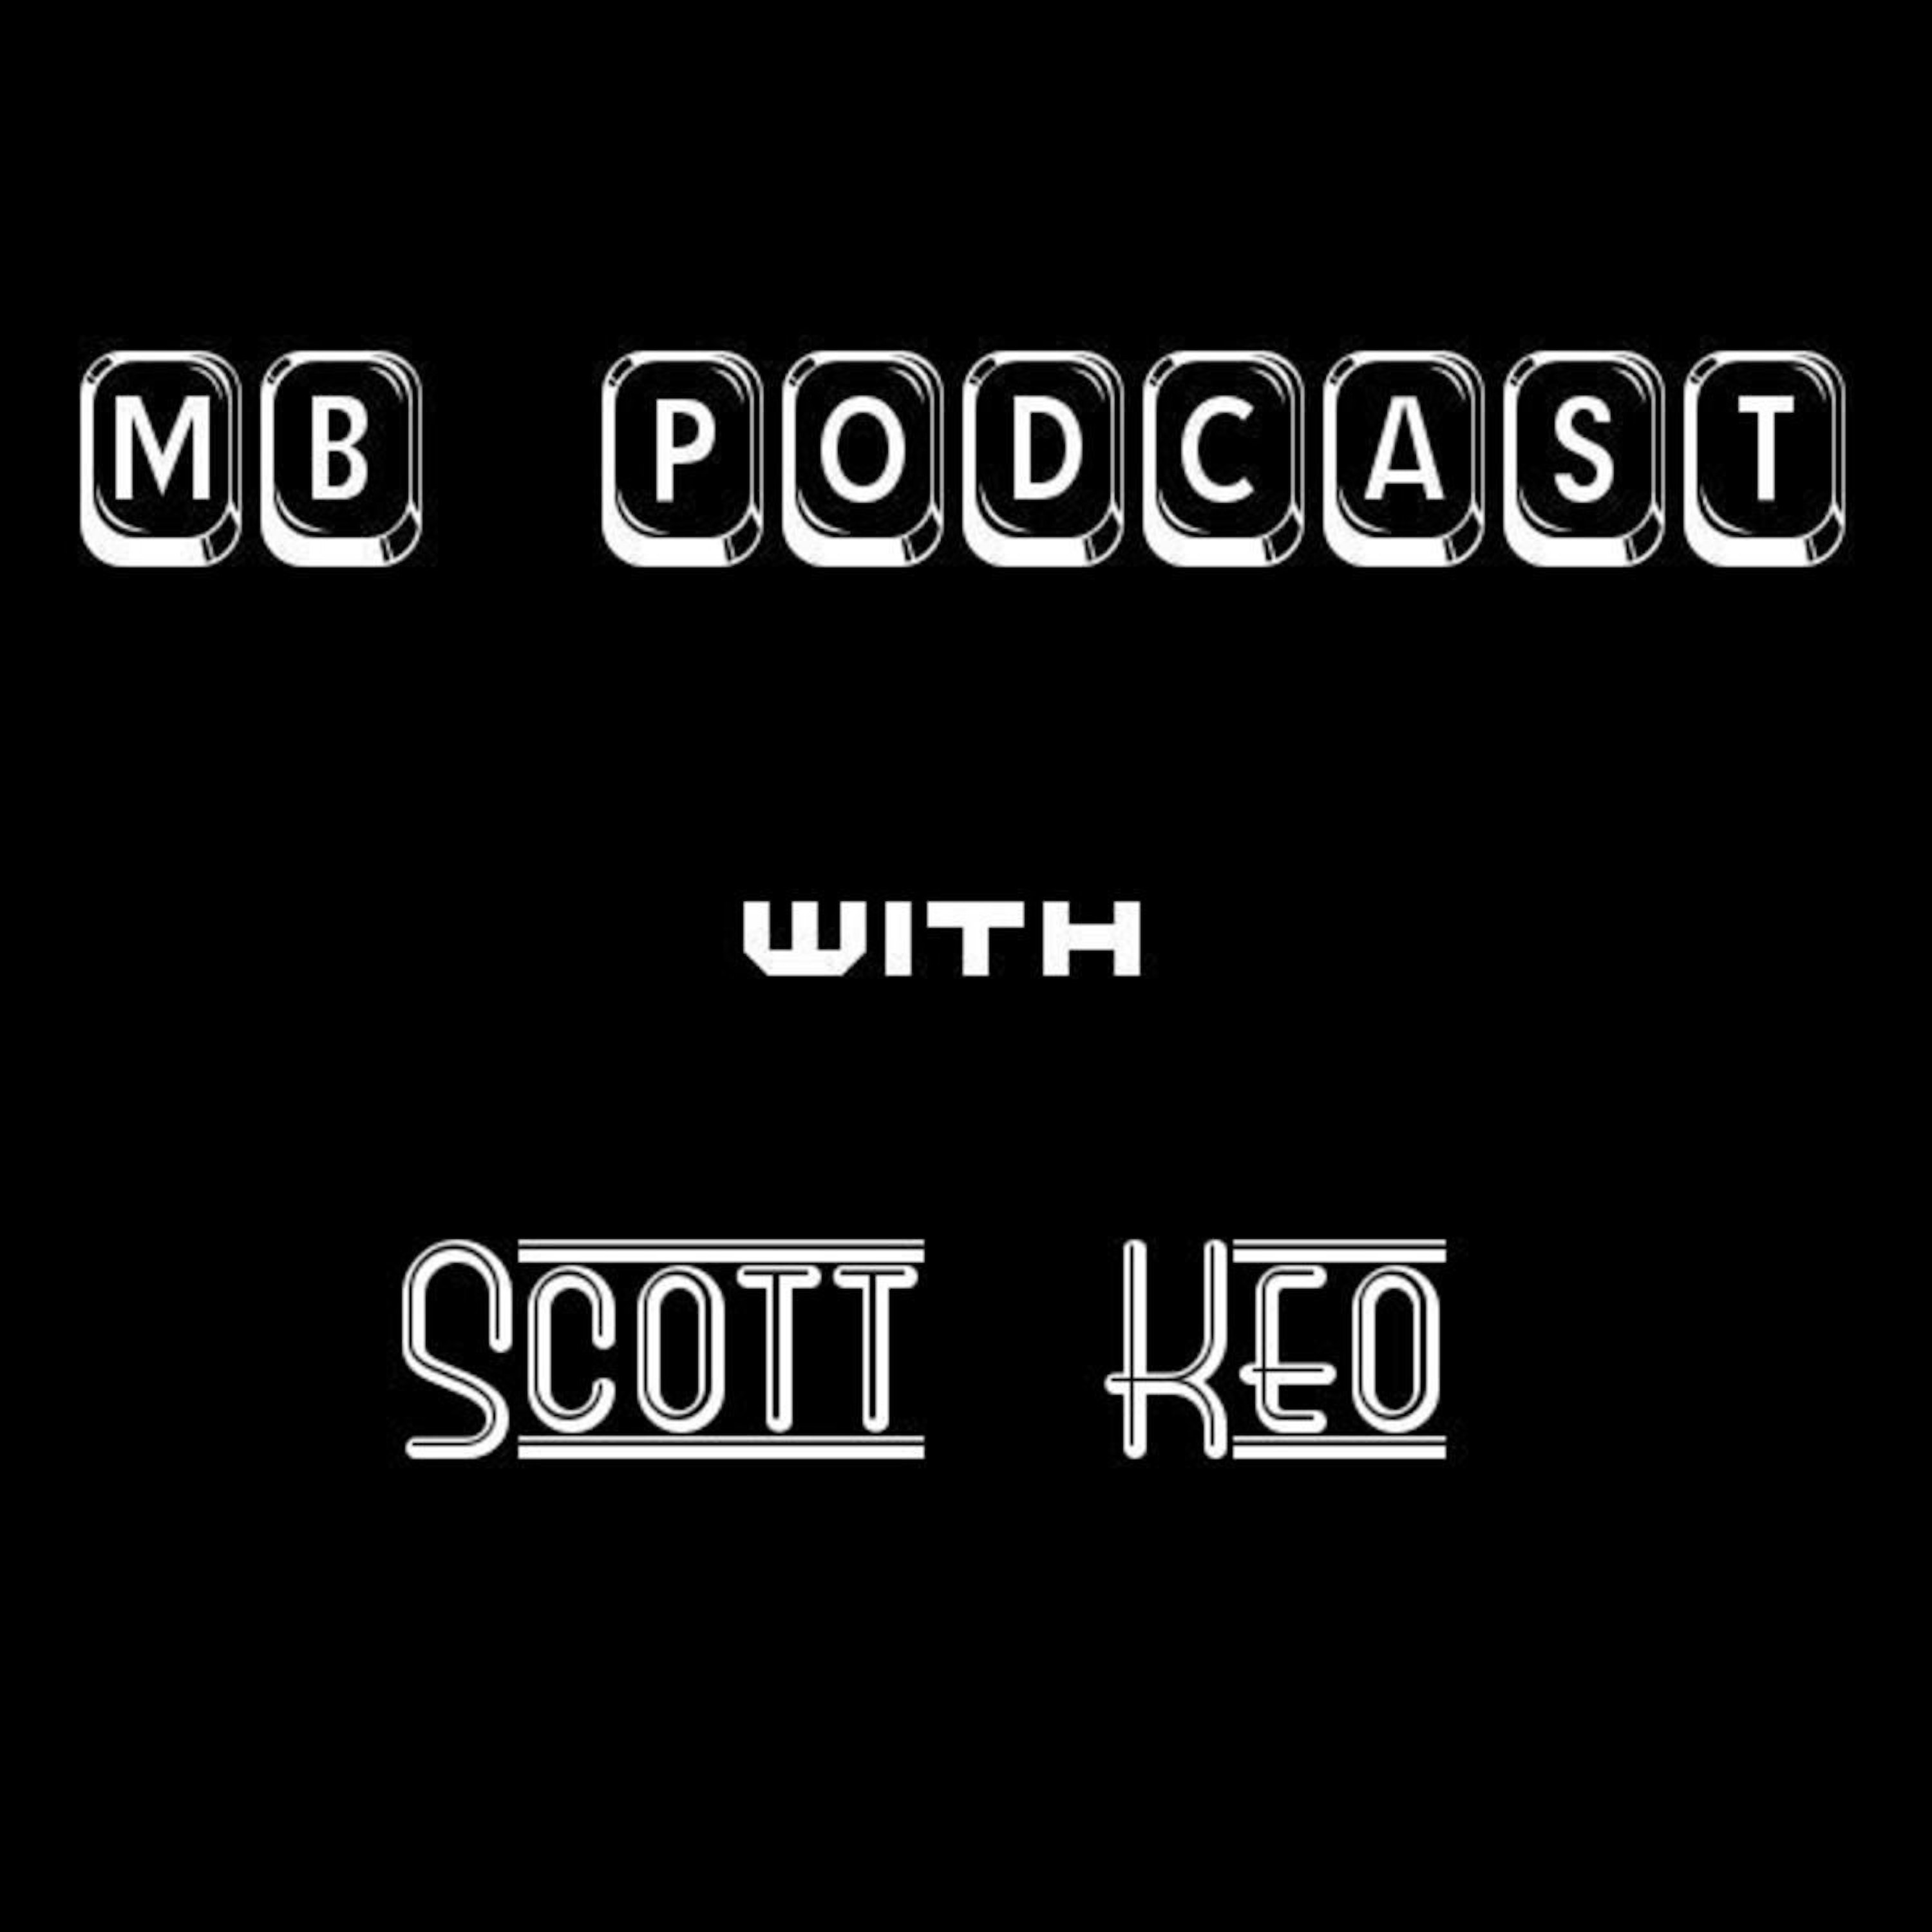 Michael Buble' Podcast With Scott Keo